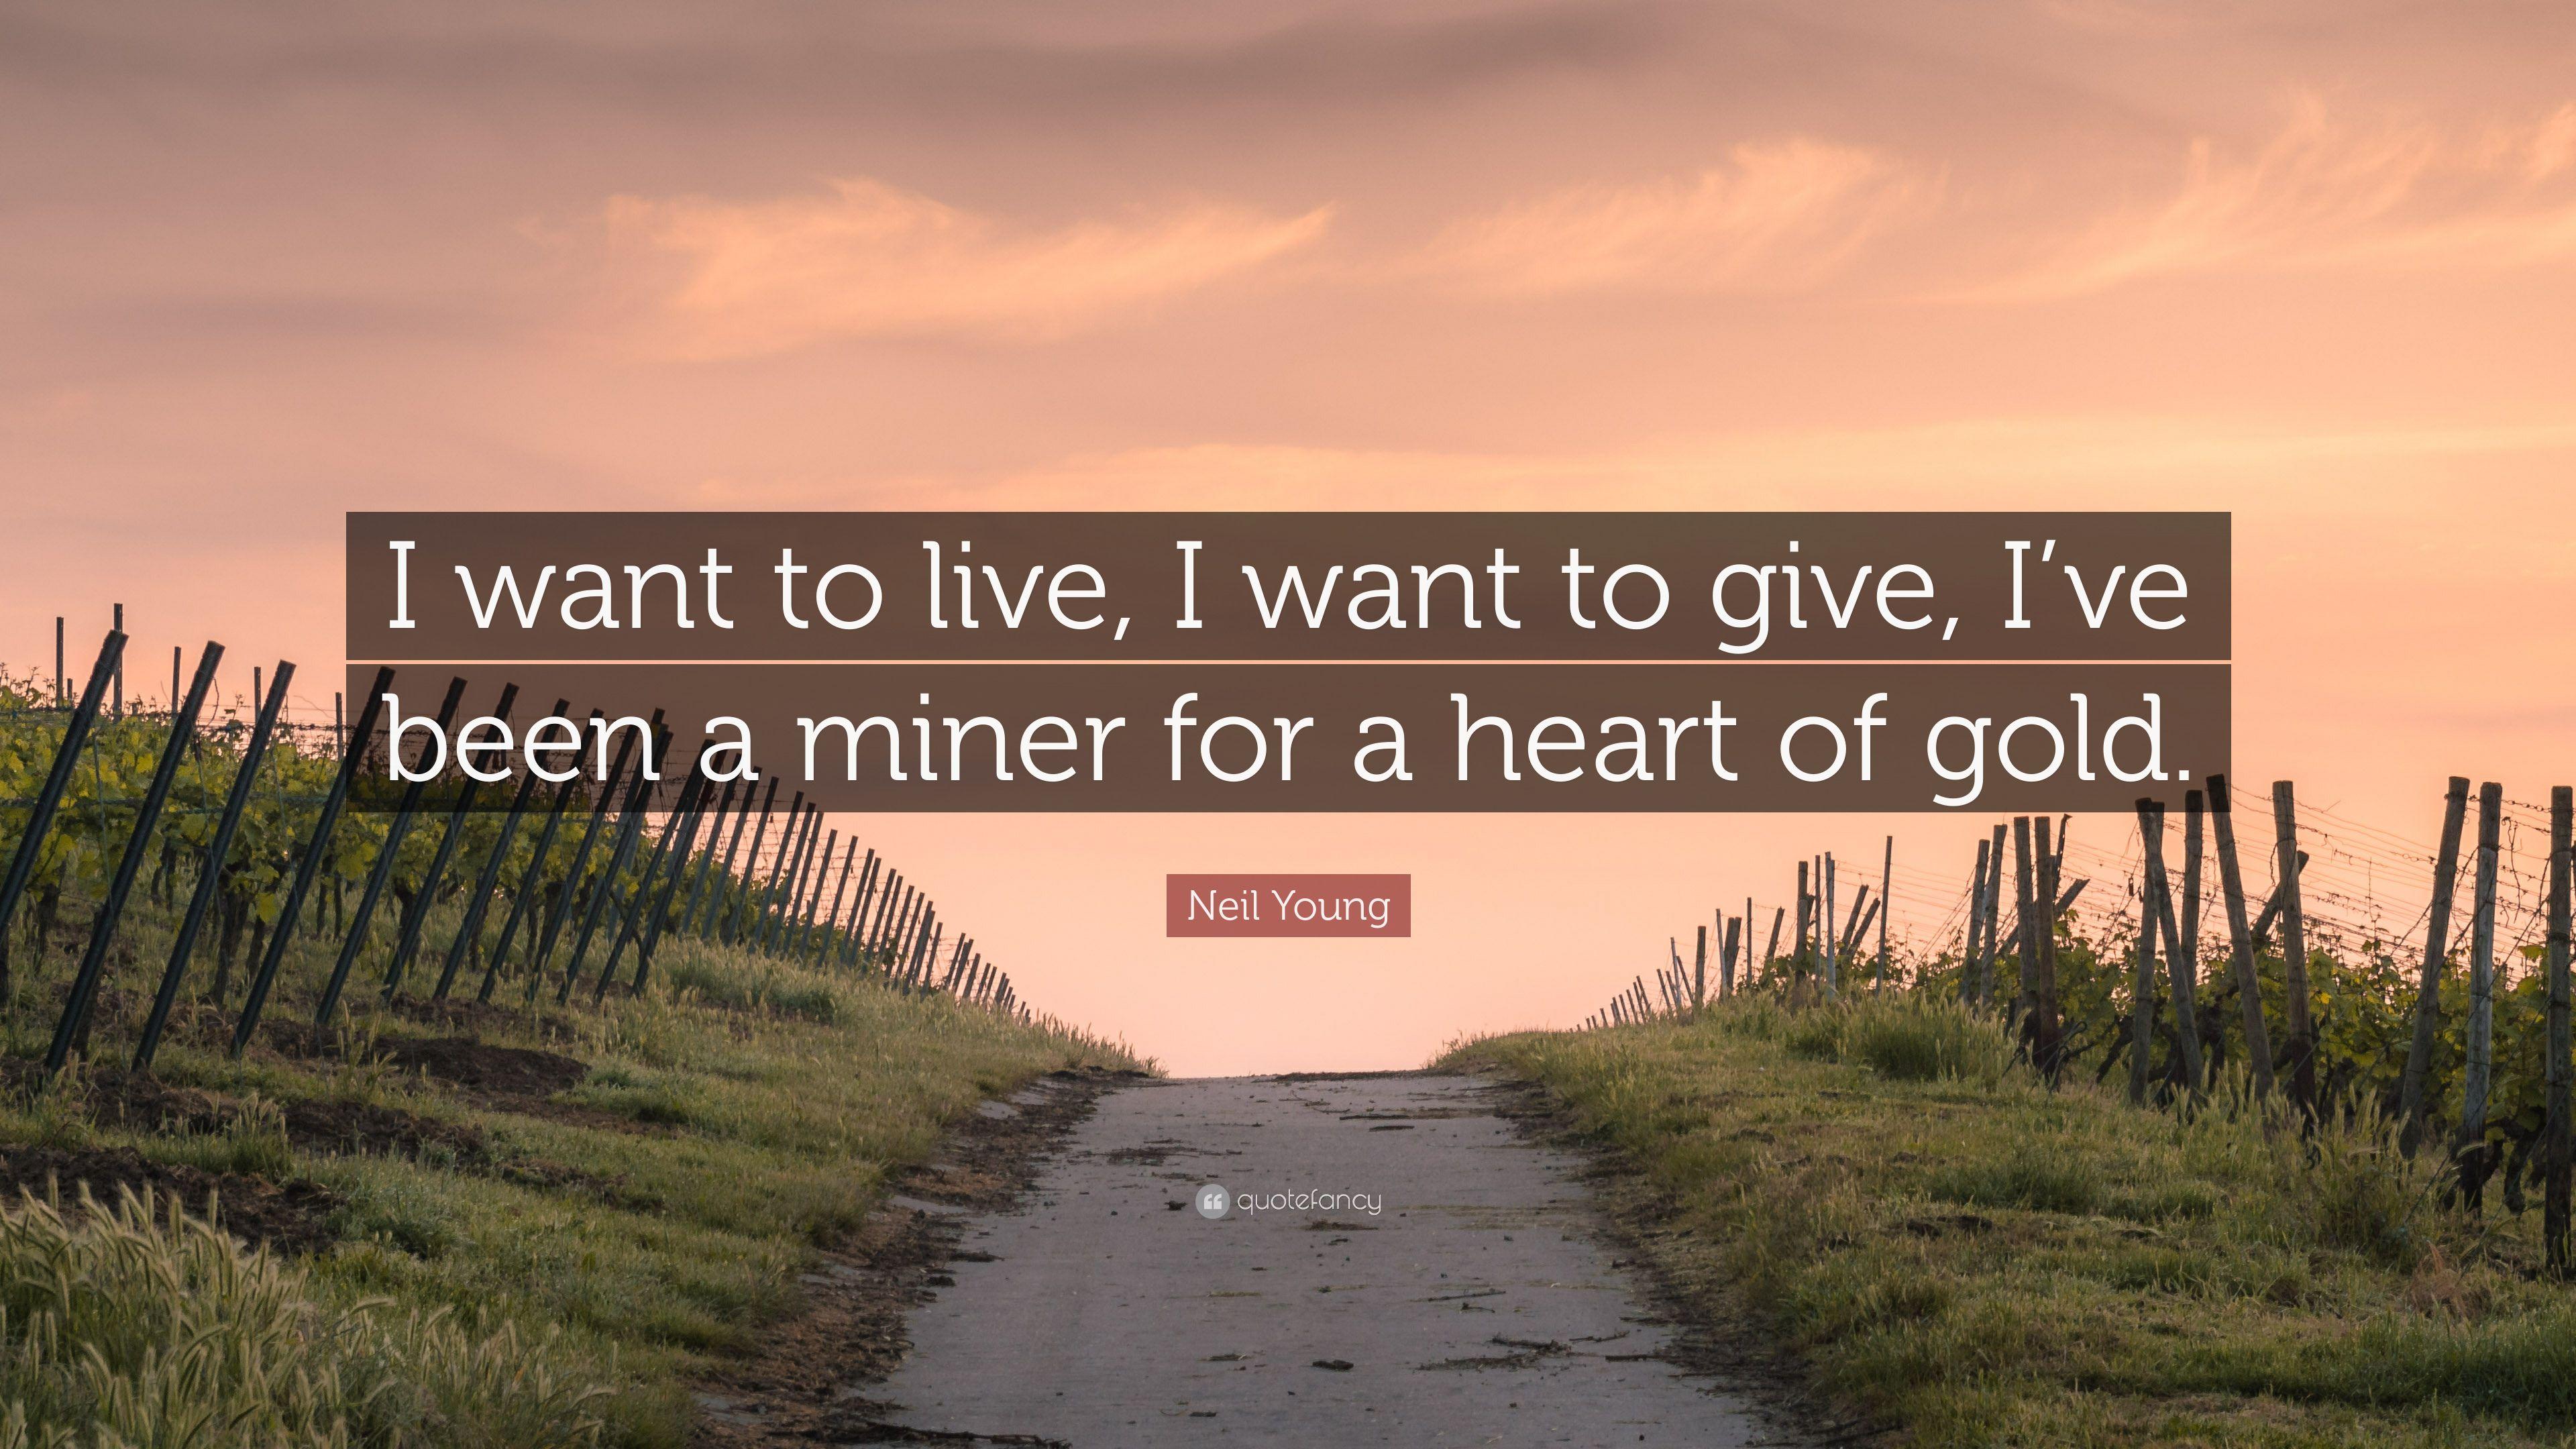 Neil Young Quote: “I want to live, I want to give, I've been a miner